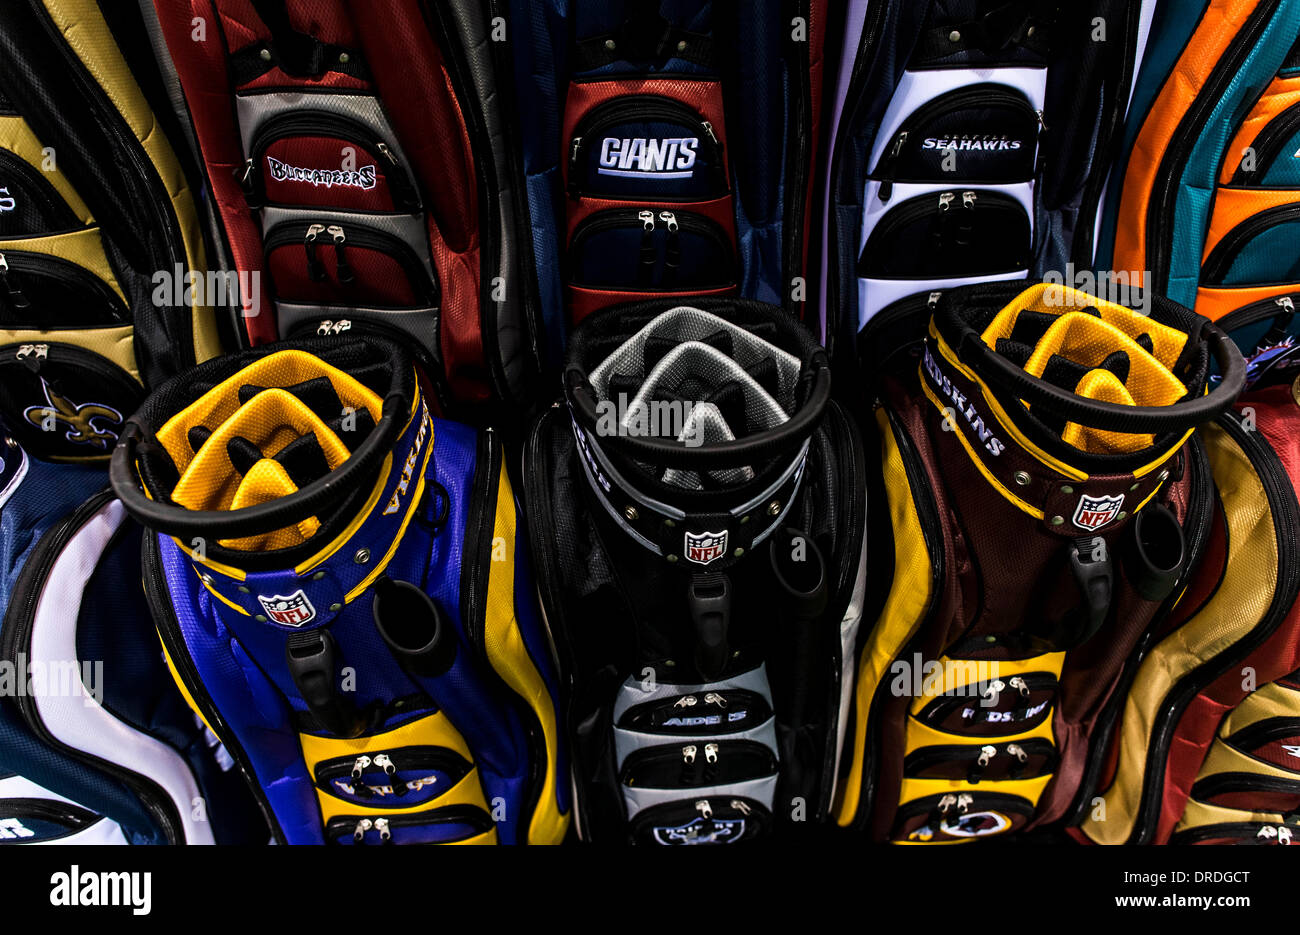 Orlando, Florida, USA. 22nd Jan, 2014. NFL-branded golf bags on display during the PGA Merchandise Show at the Orange County Convention Center. With over one million square feet of exhibit space and 41,000 attendees from all 50 U.S. states and 74 countries, the show serves as a global platform for PGA professionals, industry leaders, manufacturers and golf organizations to grow the business, participation and interest in golf. Credit:  Brian Cahn/ZUMAPRESS.com/Alamy Live News Stock Photo